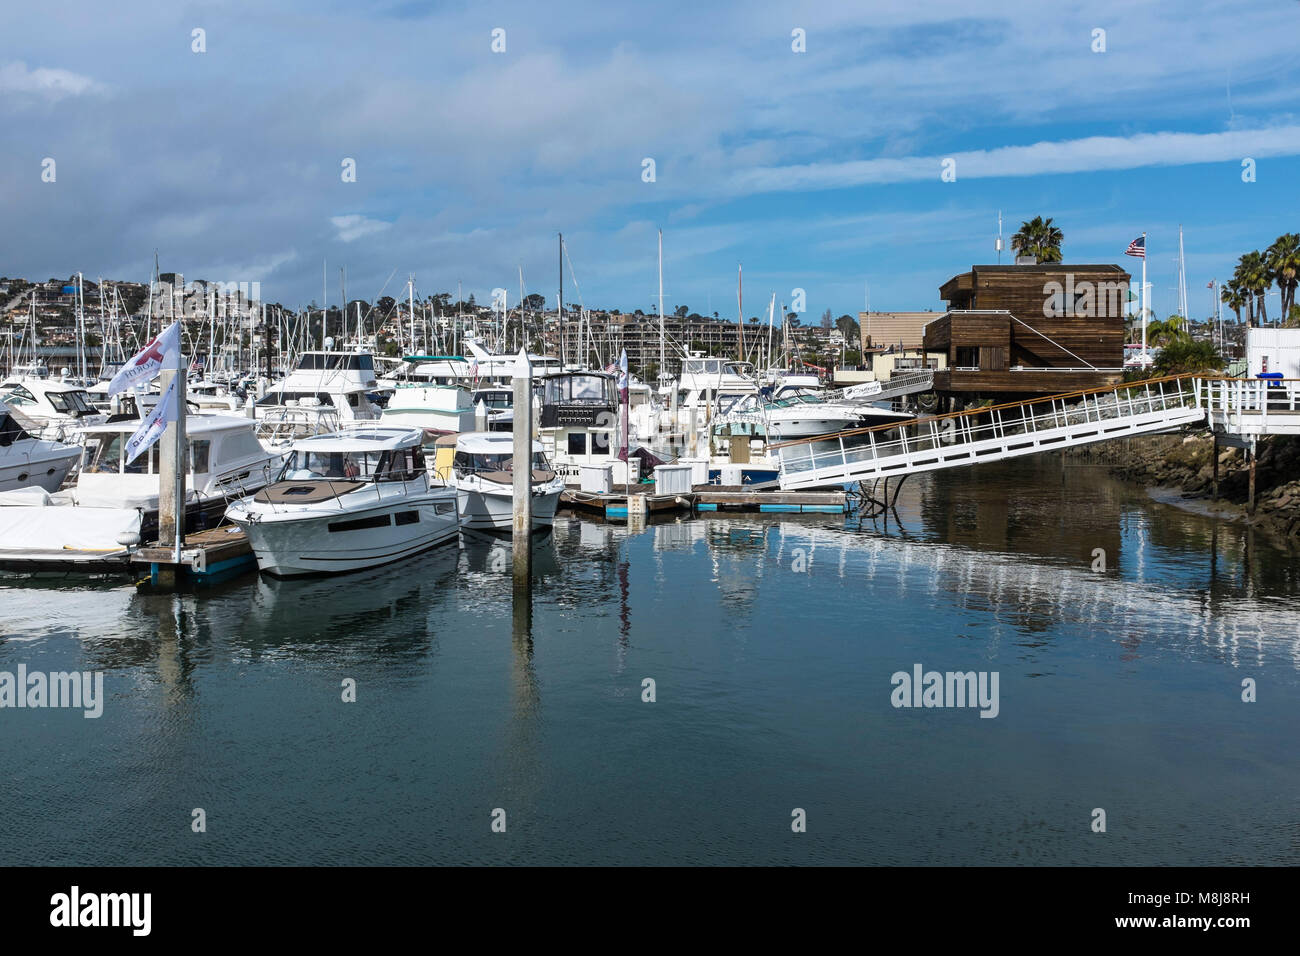 SAN DIEGO, CALIFORNIA, USA - Yachts moored at Shelter Island in the Yachts Basin. Stock Photo